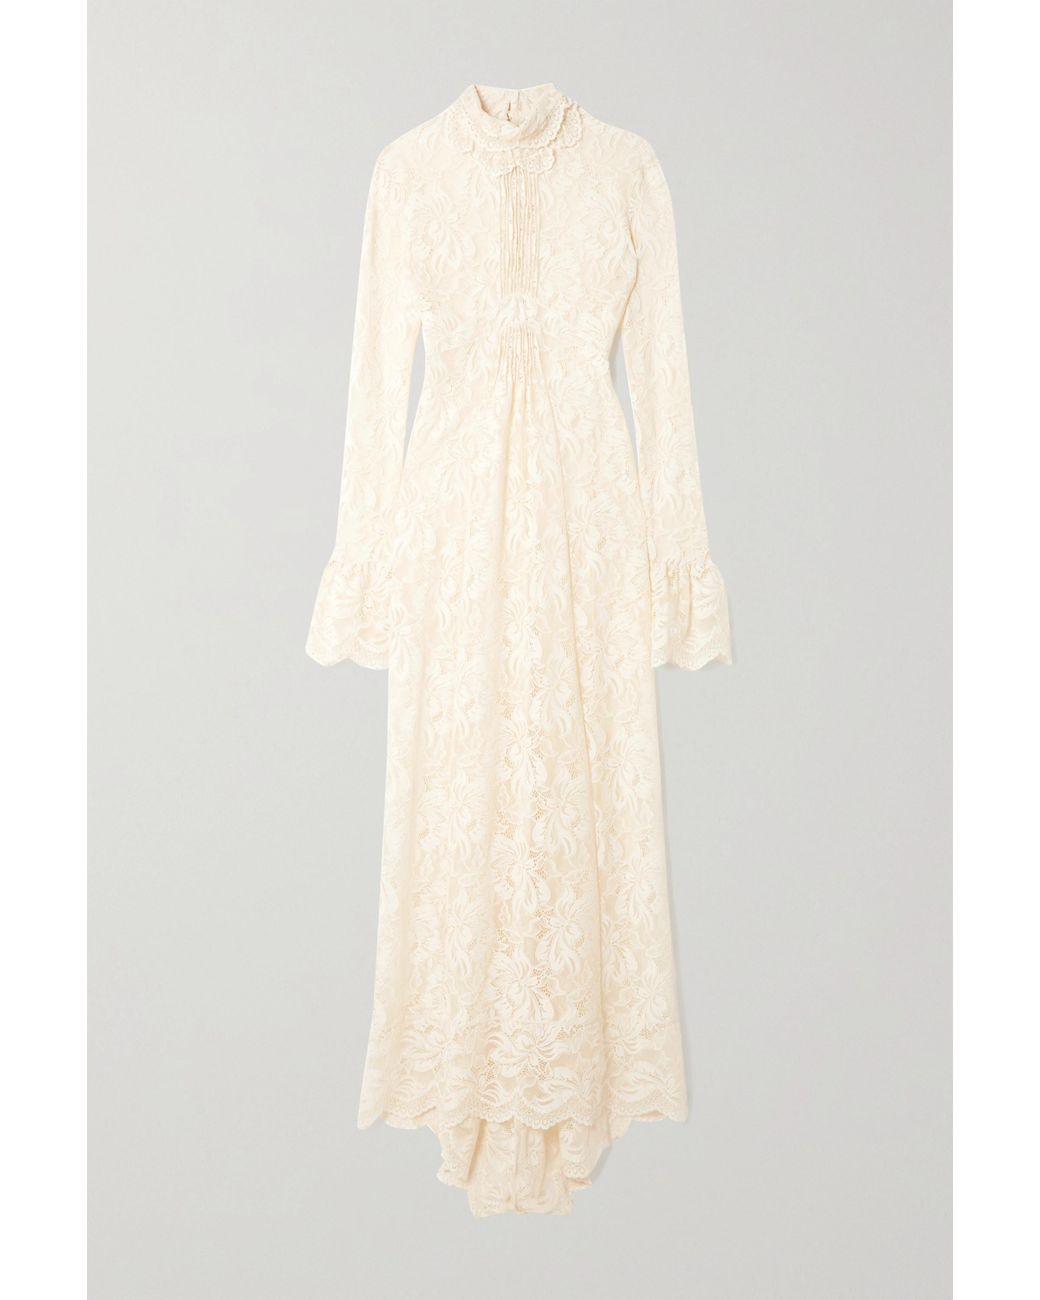 Paco Rabanne Ruffled Lace Turtleneck Maxi Dress in White | Lyst